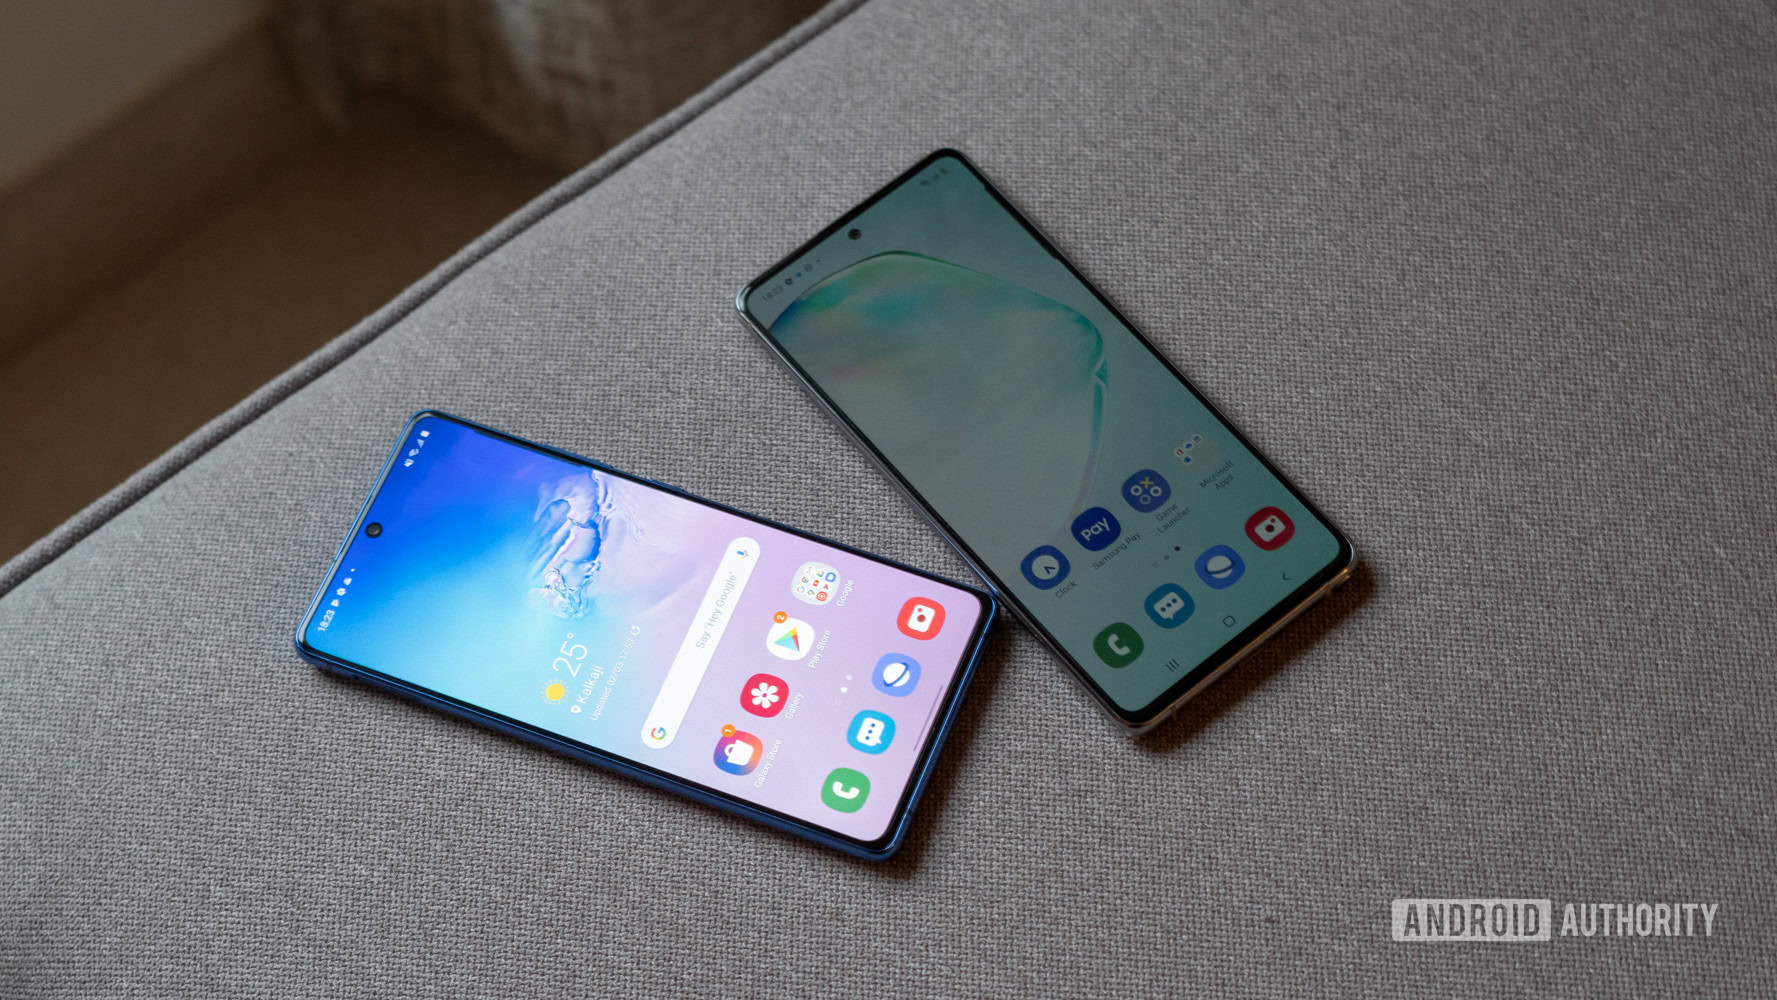 Samsung's new Galaxy S10 Lite and Note 10 Lite phones are deeply confusing  - The Verge